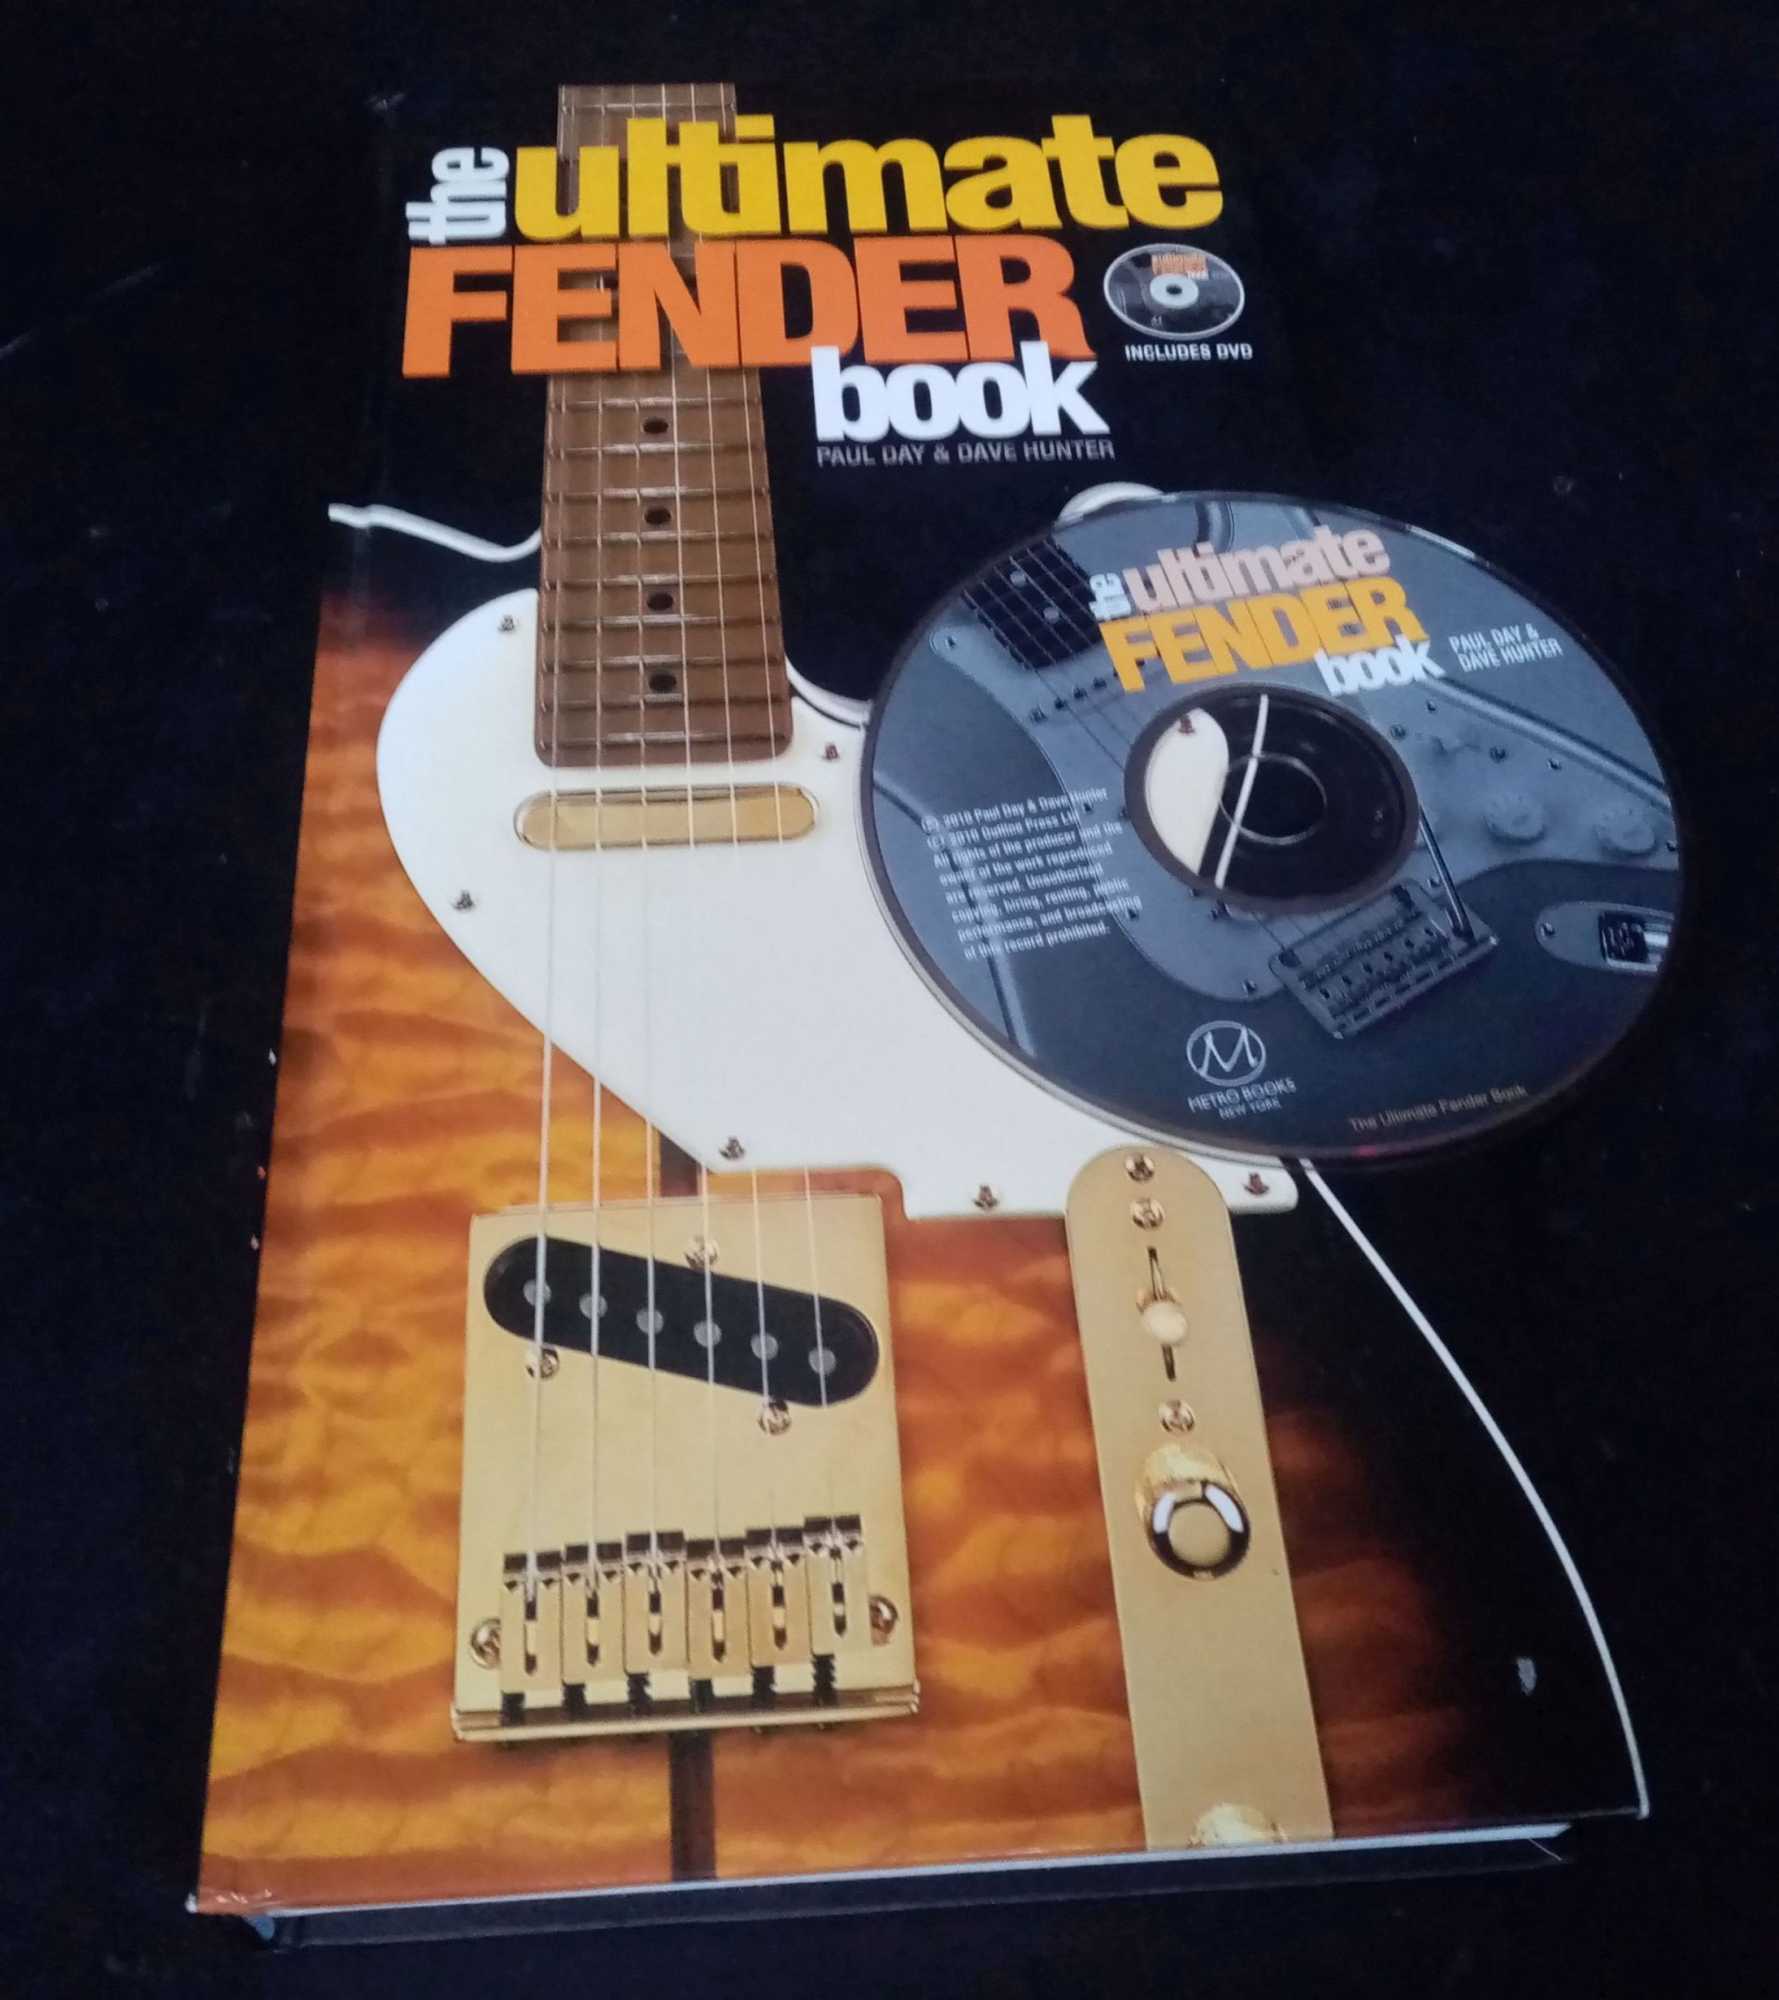 Day, Paul; Hunter, Dave - The Ultimate Fender Book [DVD included]